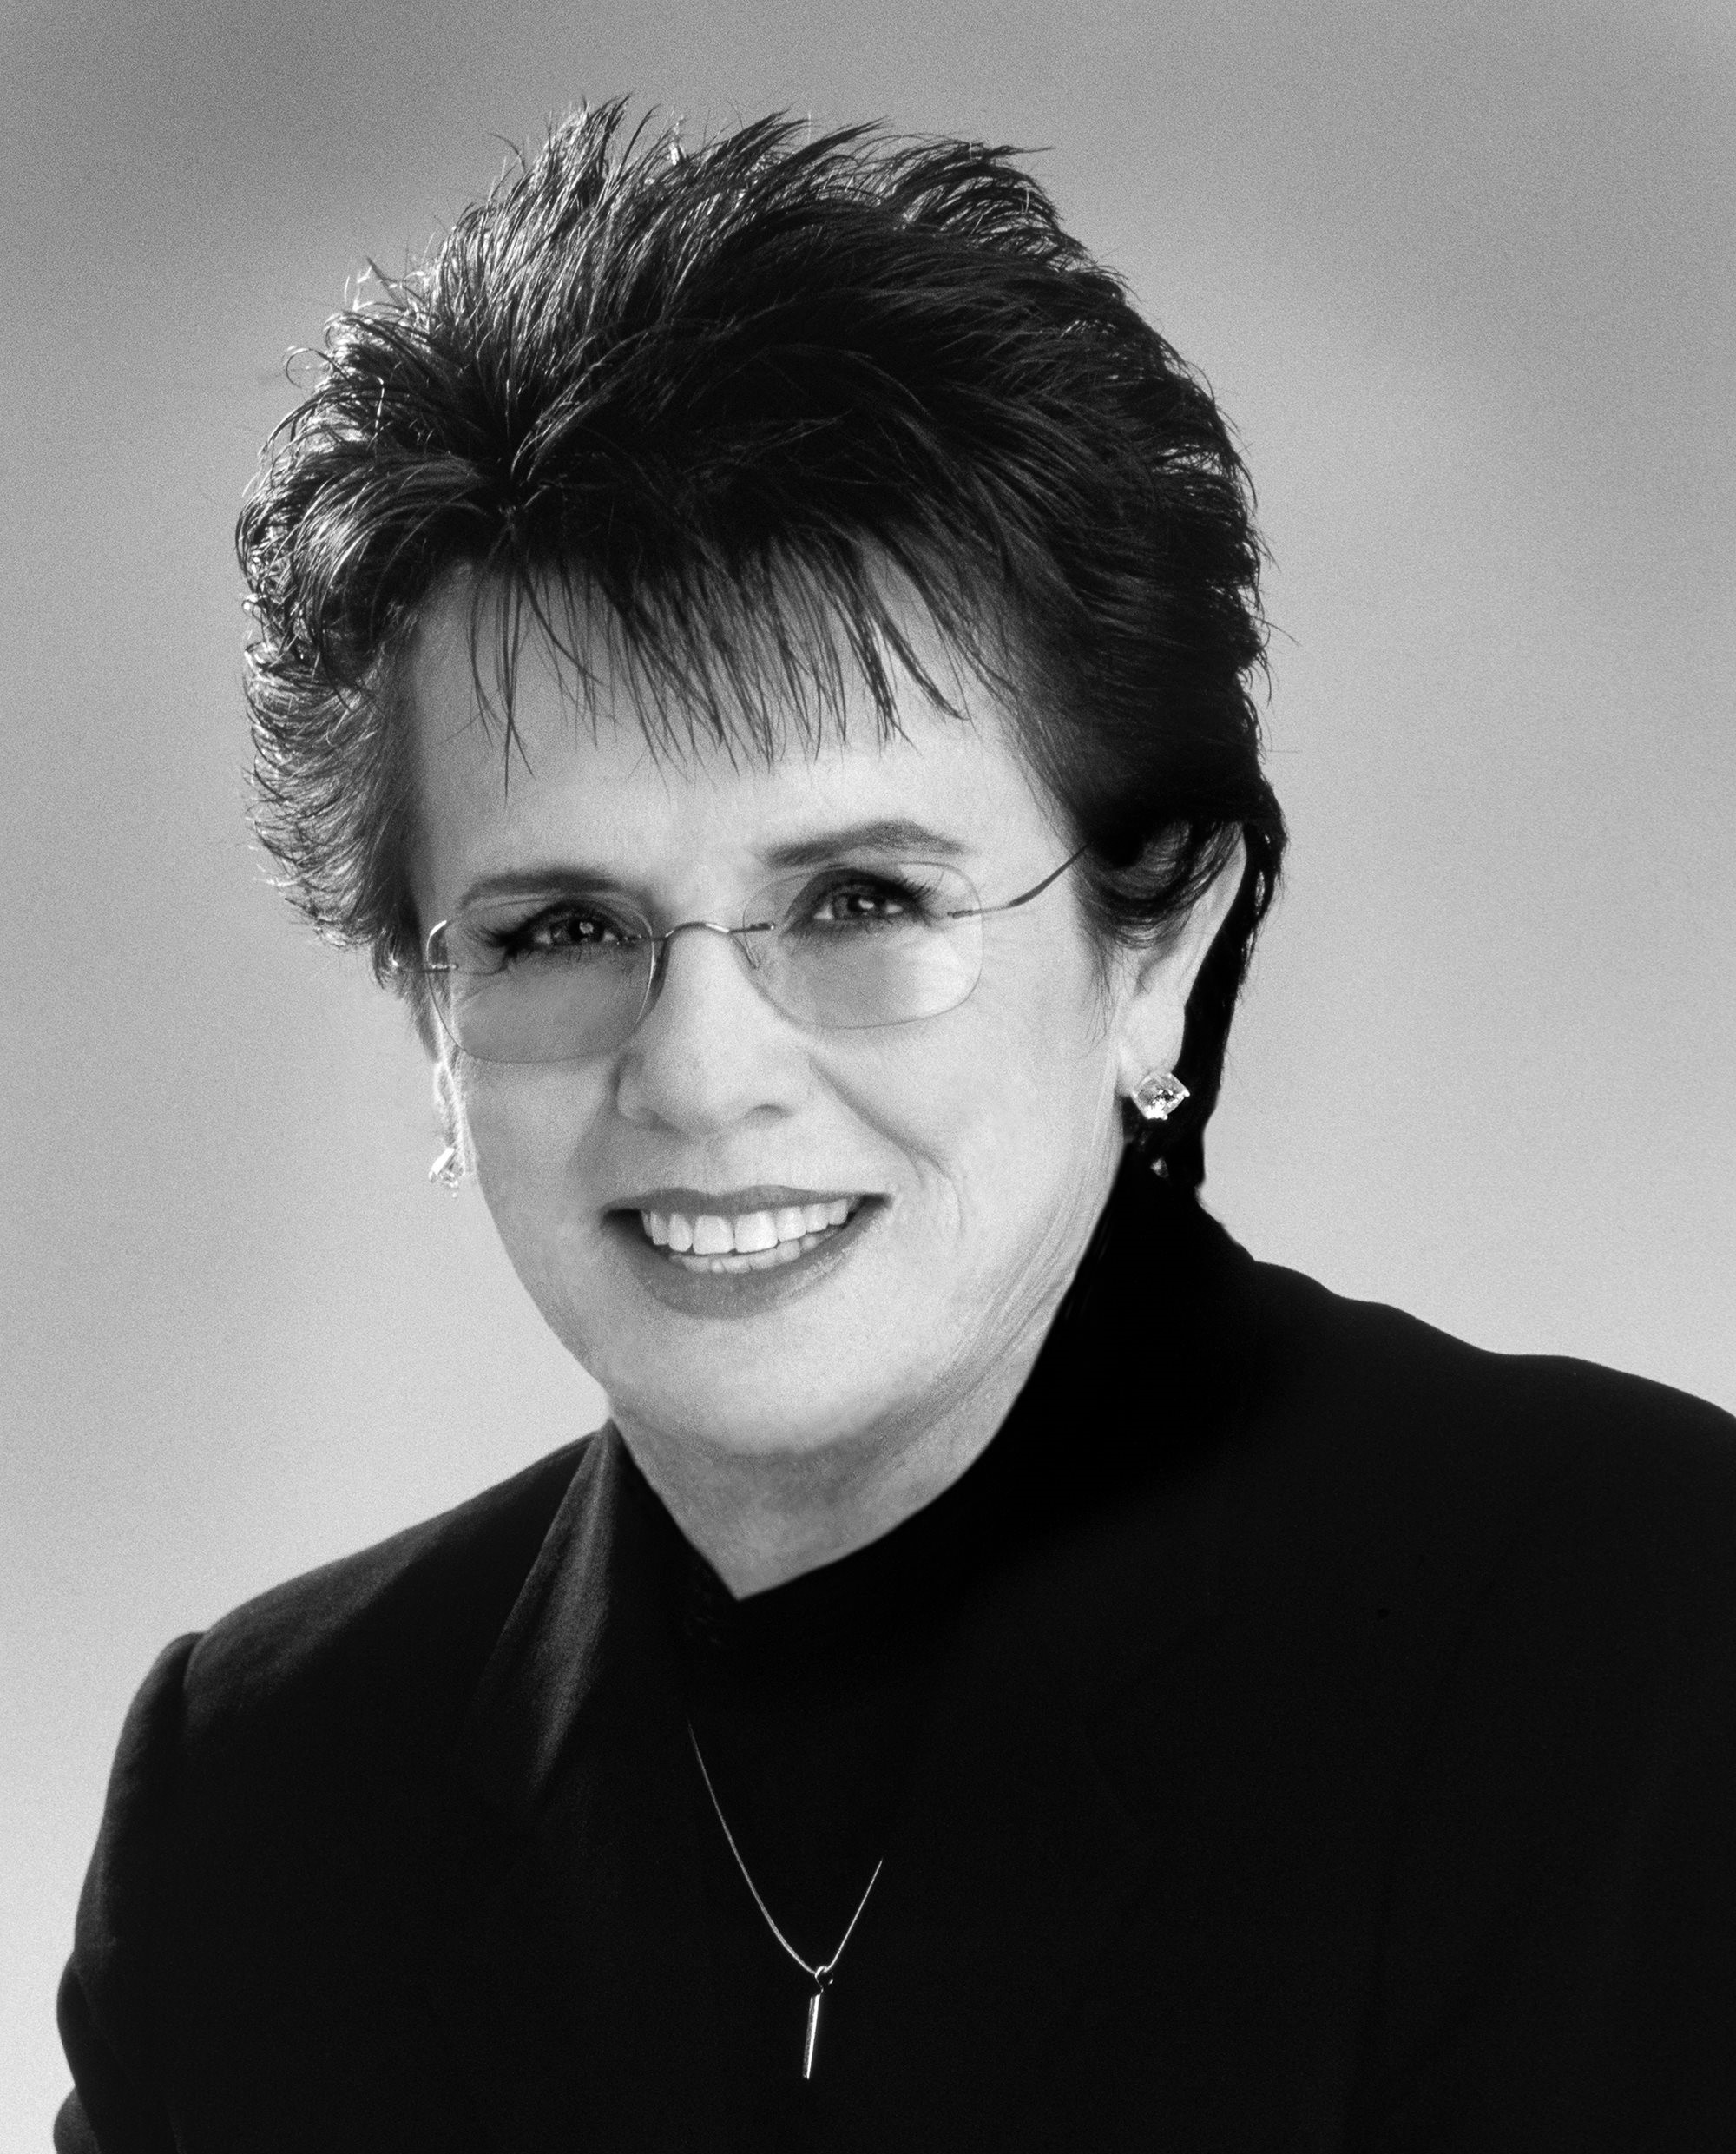 Headshot of a smiling and dressed-up Billie Jean King.